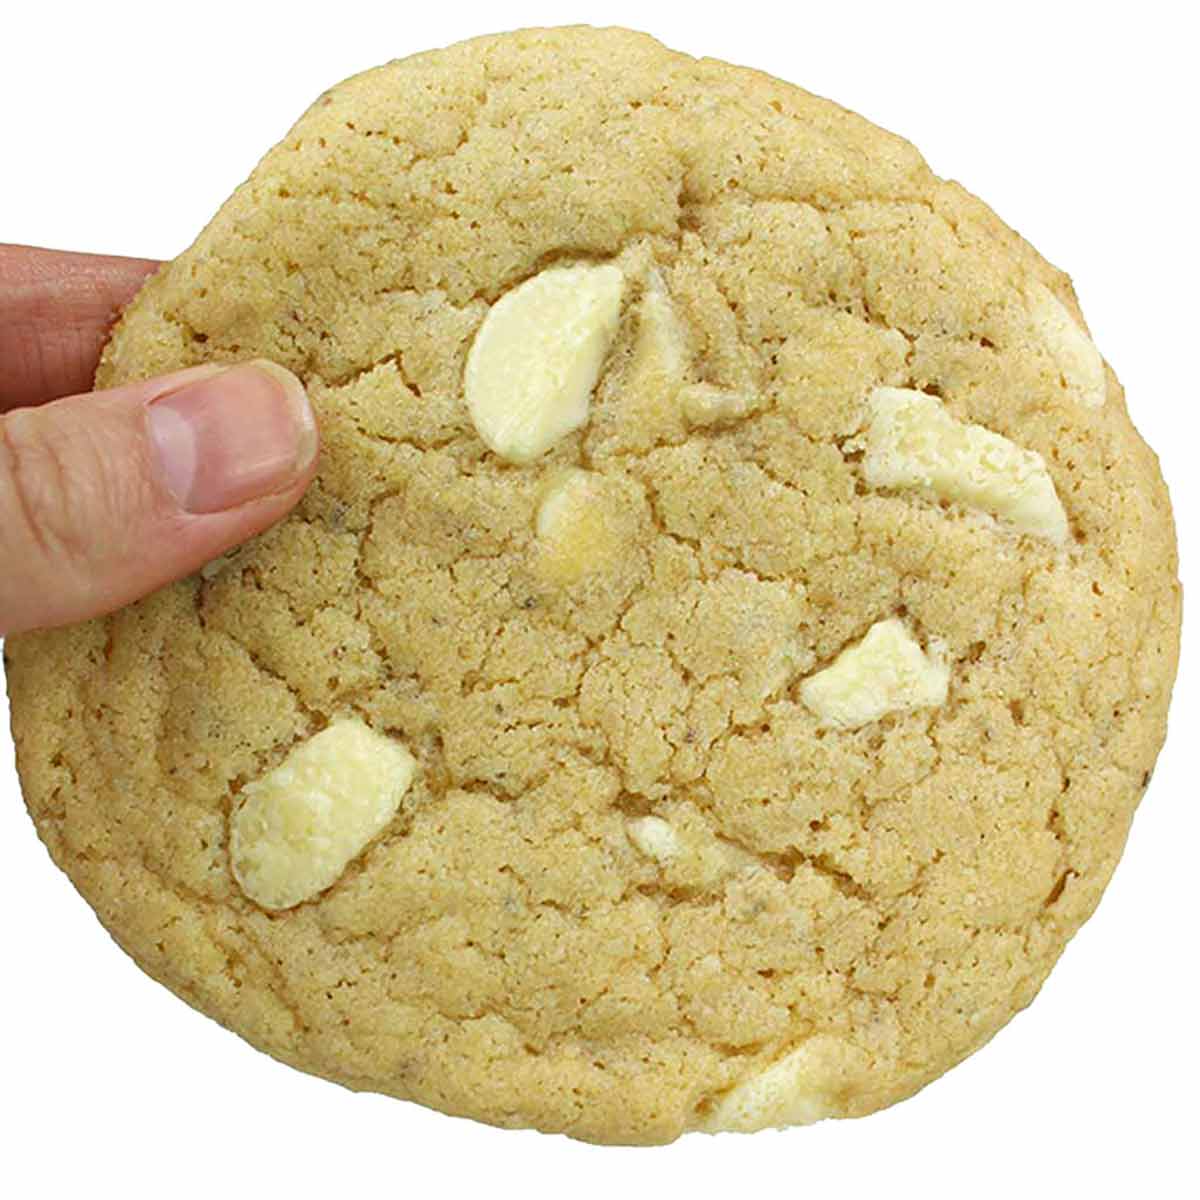 Hand Holding A White Chocolate Cookie